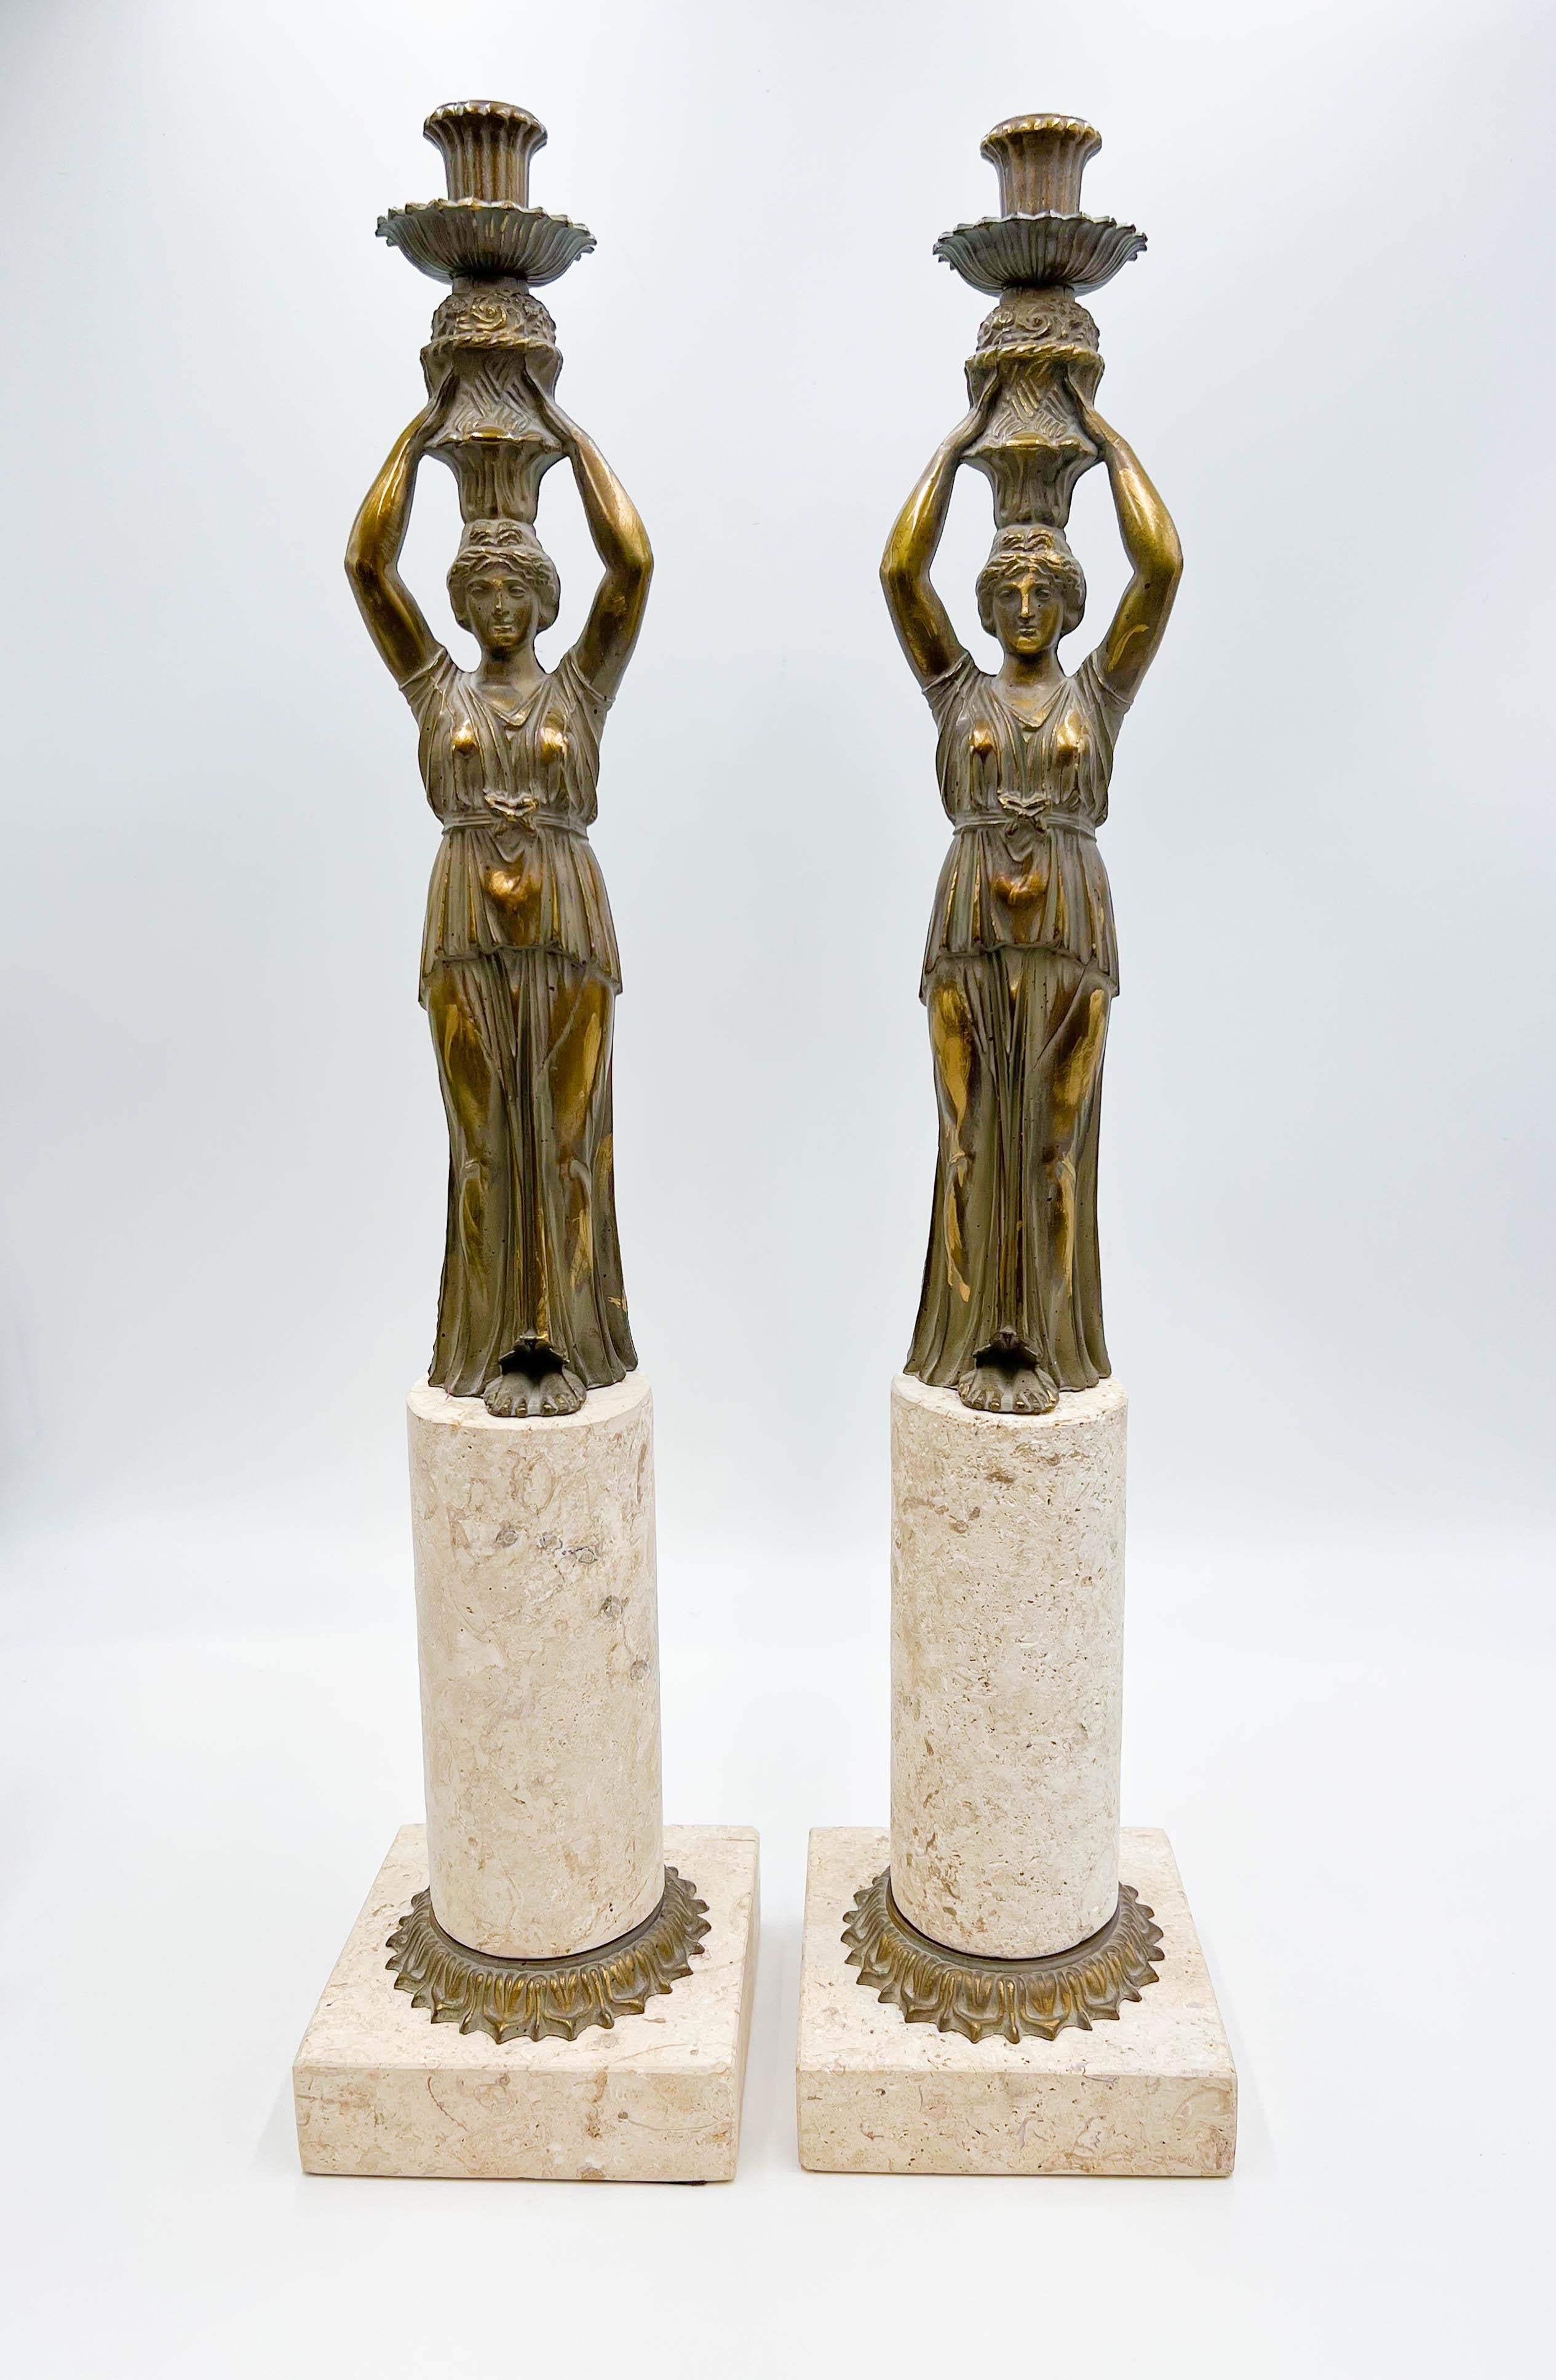 Introducing a pair of solid brass and limestone candleholders., characteristic of the Neoclassical and Art Nouveau styles. The figural candleholders are mounted on a limestone base, creating a visually striking combination of materials.

Condition: